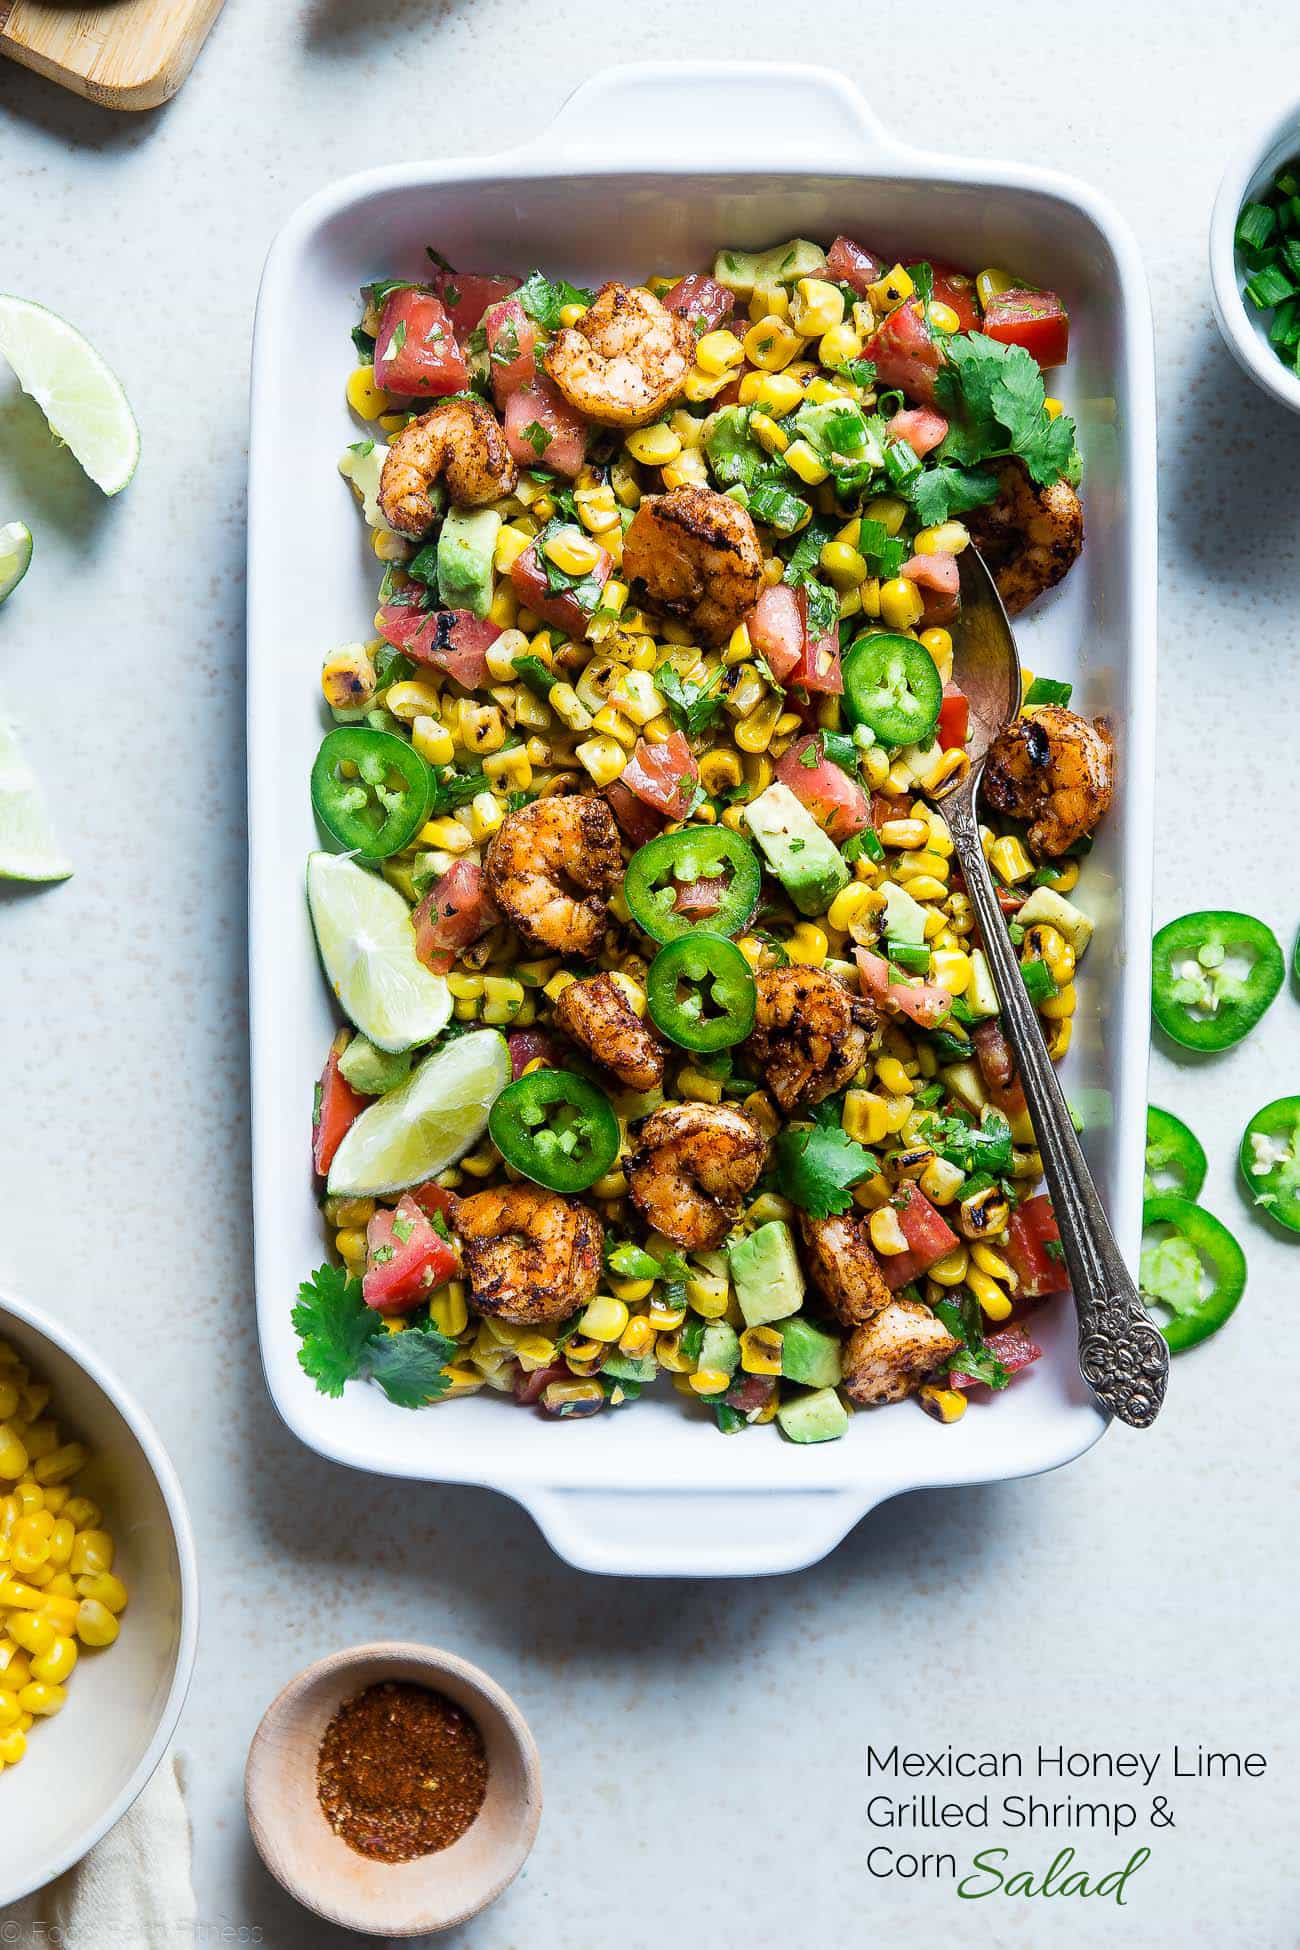  Healthy Honey Lime Grilled Mexican Corn Salad with Shrimp - This quick and easy, gluten free salad is tossed with juicy, smoky shrimp and has a sweet and tangy honey lime vinaigrette! Perfect for summer cook outs! | Foodfaithfitness.com | @FoodFaithFit